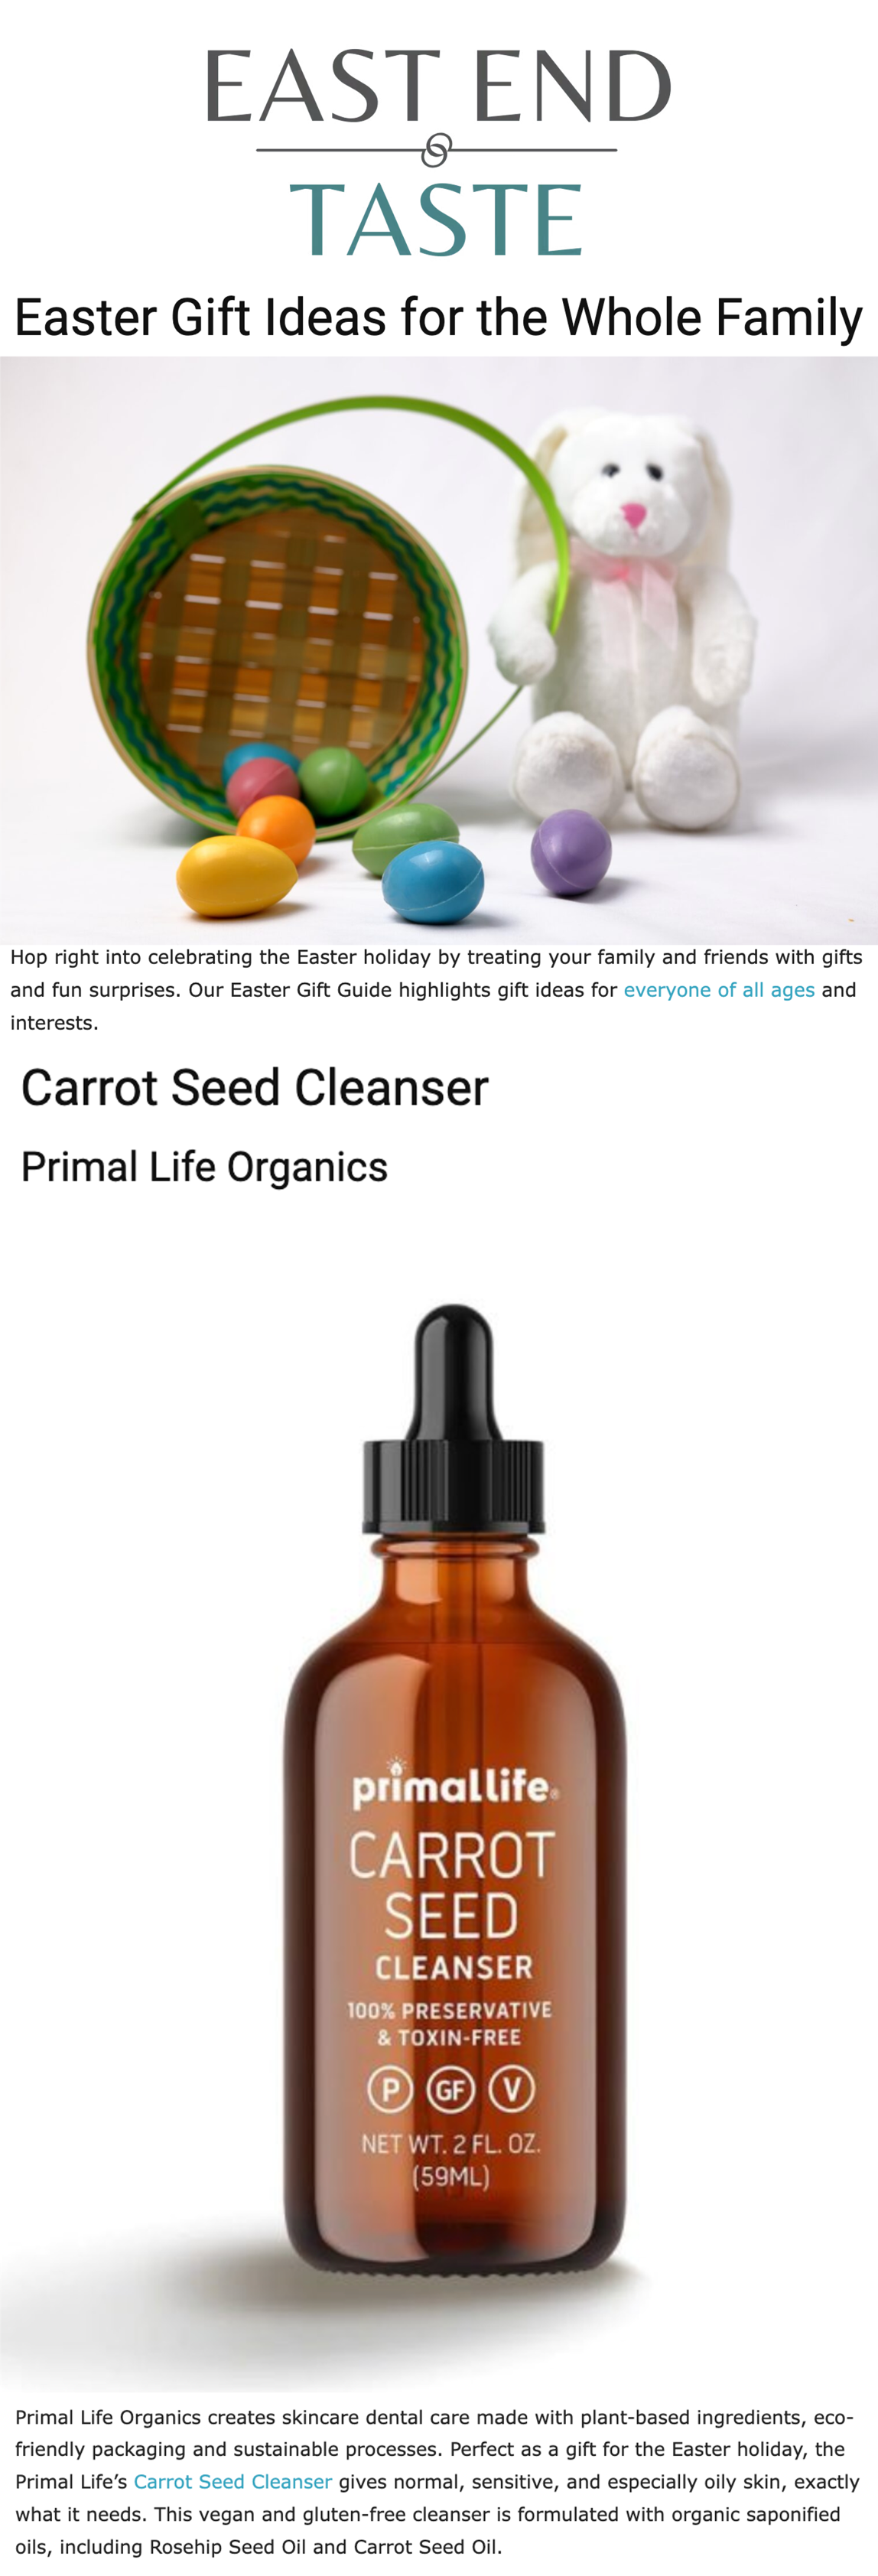 East End Table featuring Primal Life Organics Carrot Seed Cleanser